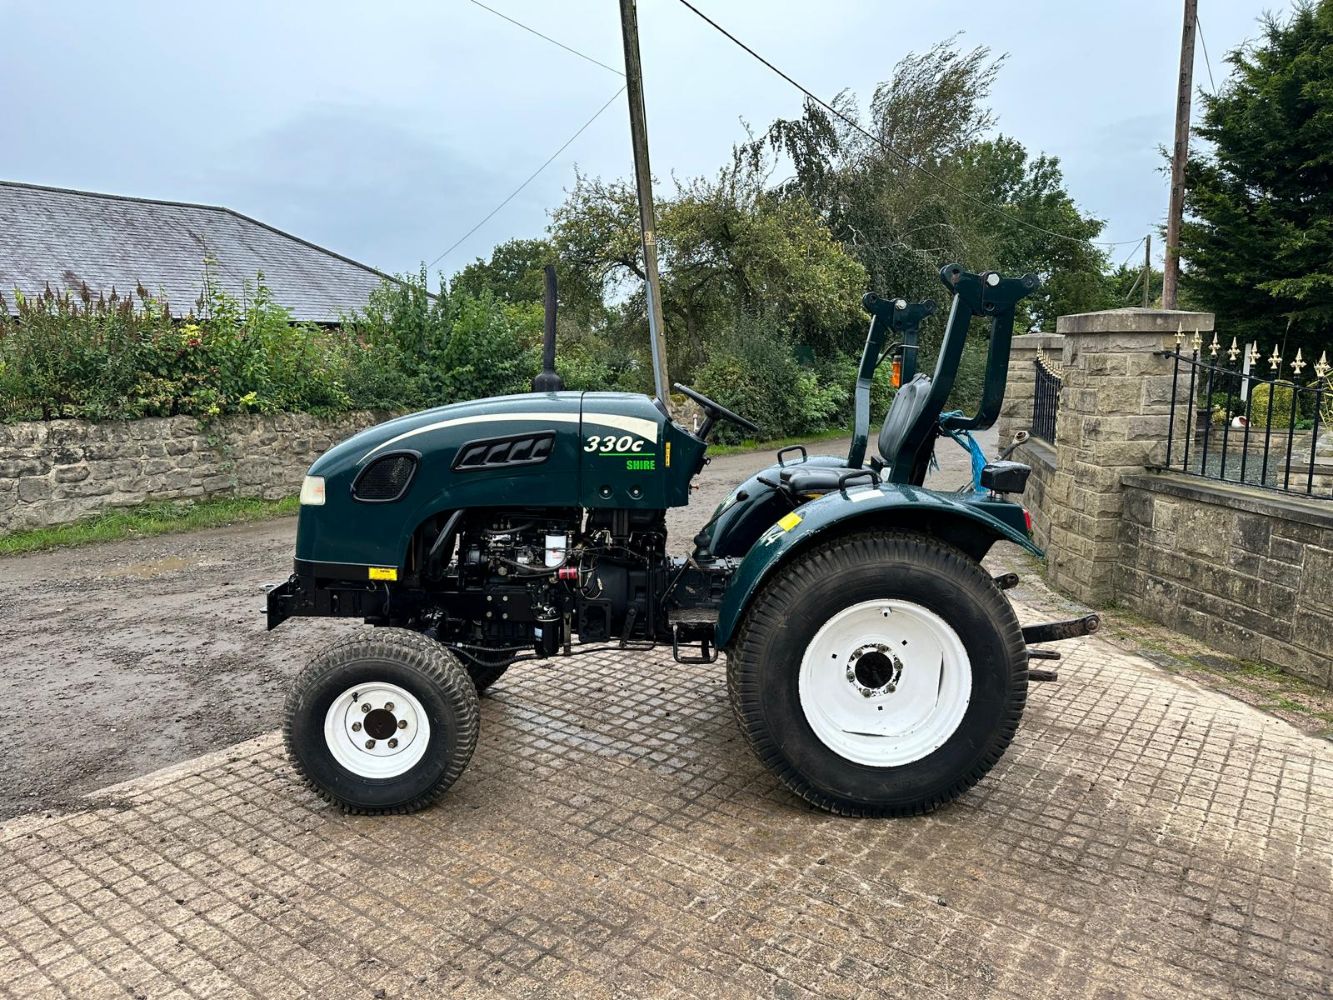 ENDS FROM 1pm TODAY! SHIRE 330C 4WD TRACTOR, ELECTRIC TUG, SWEEPER COLLECTOR, MOWERS, MINI DIGGERS, HIGH TIP DUMPERS, GENERATORS AND MORE